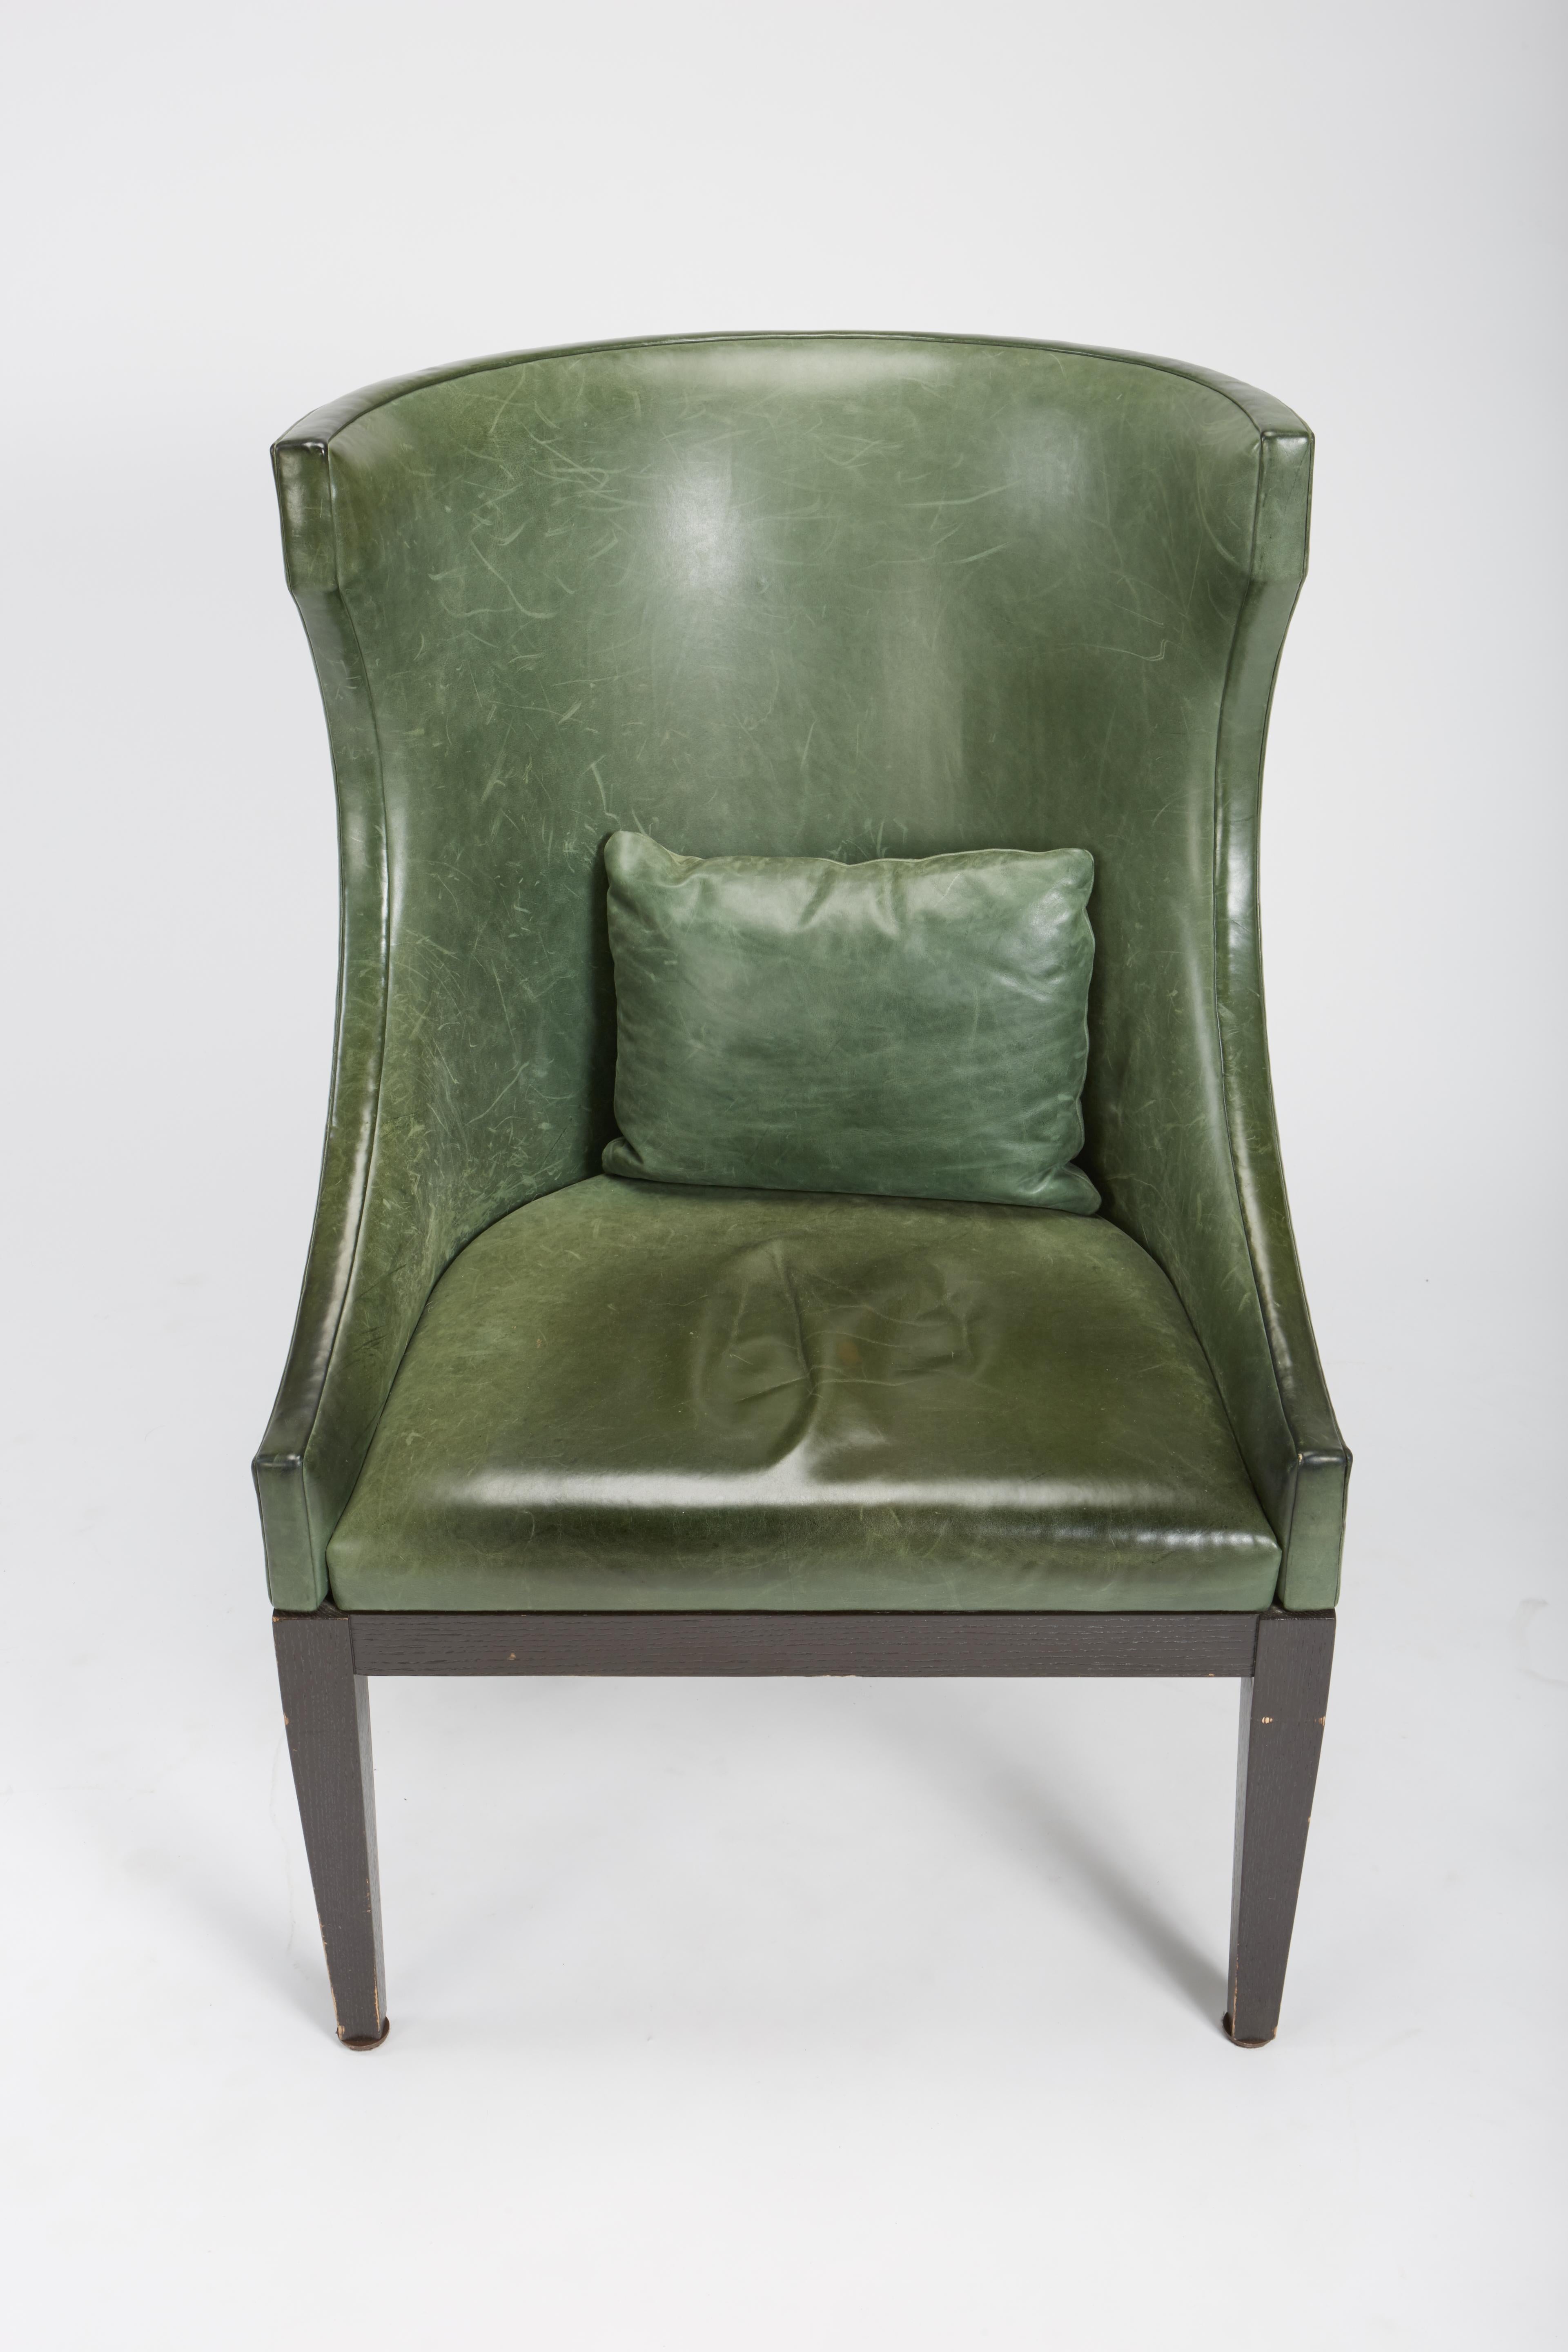 North American Dessin Fournir Classical Modern High Wingback with Green Leather Armchairs